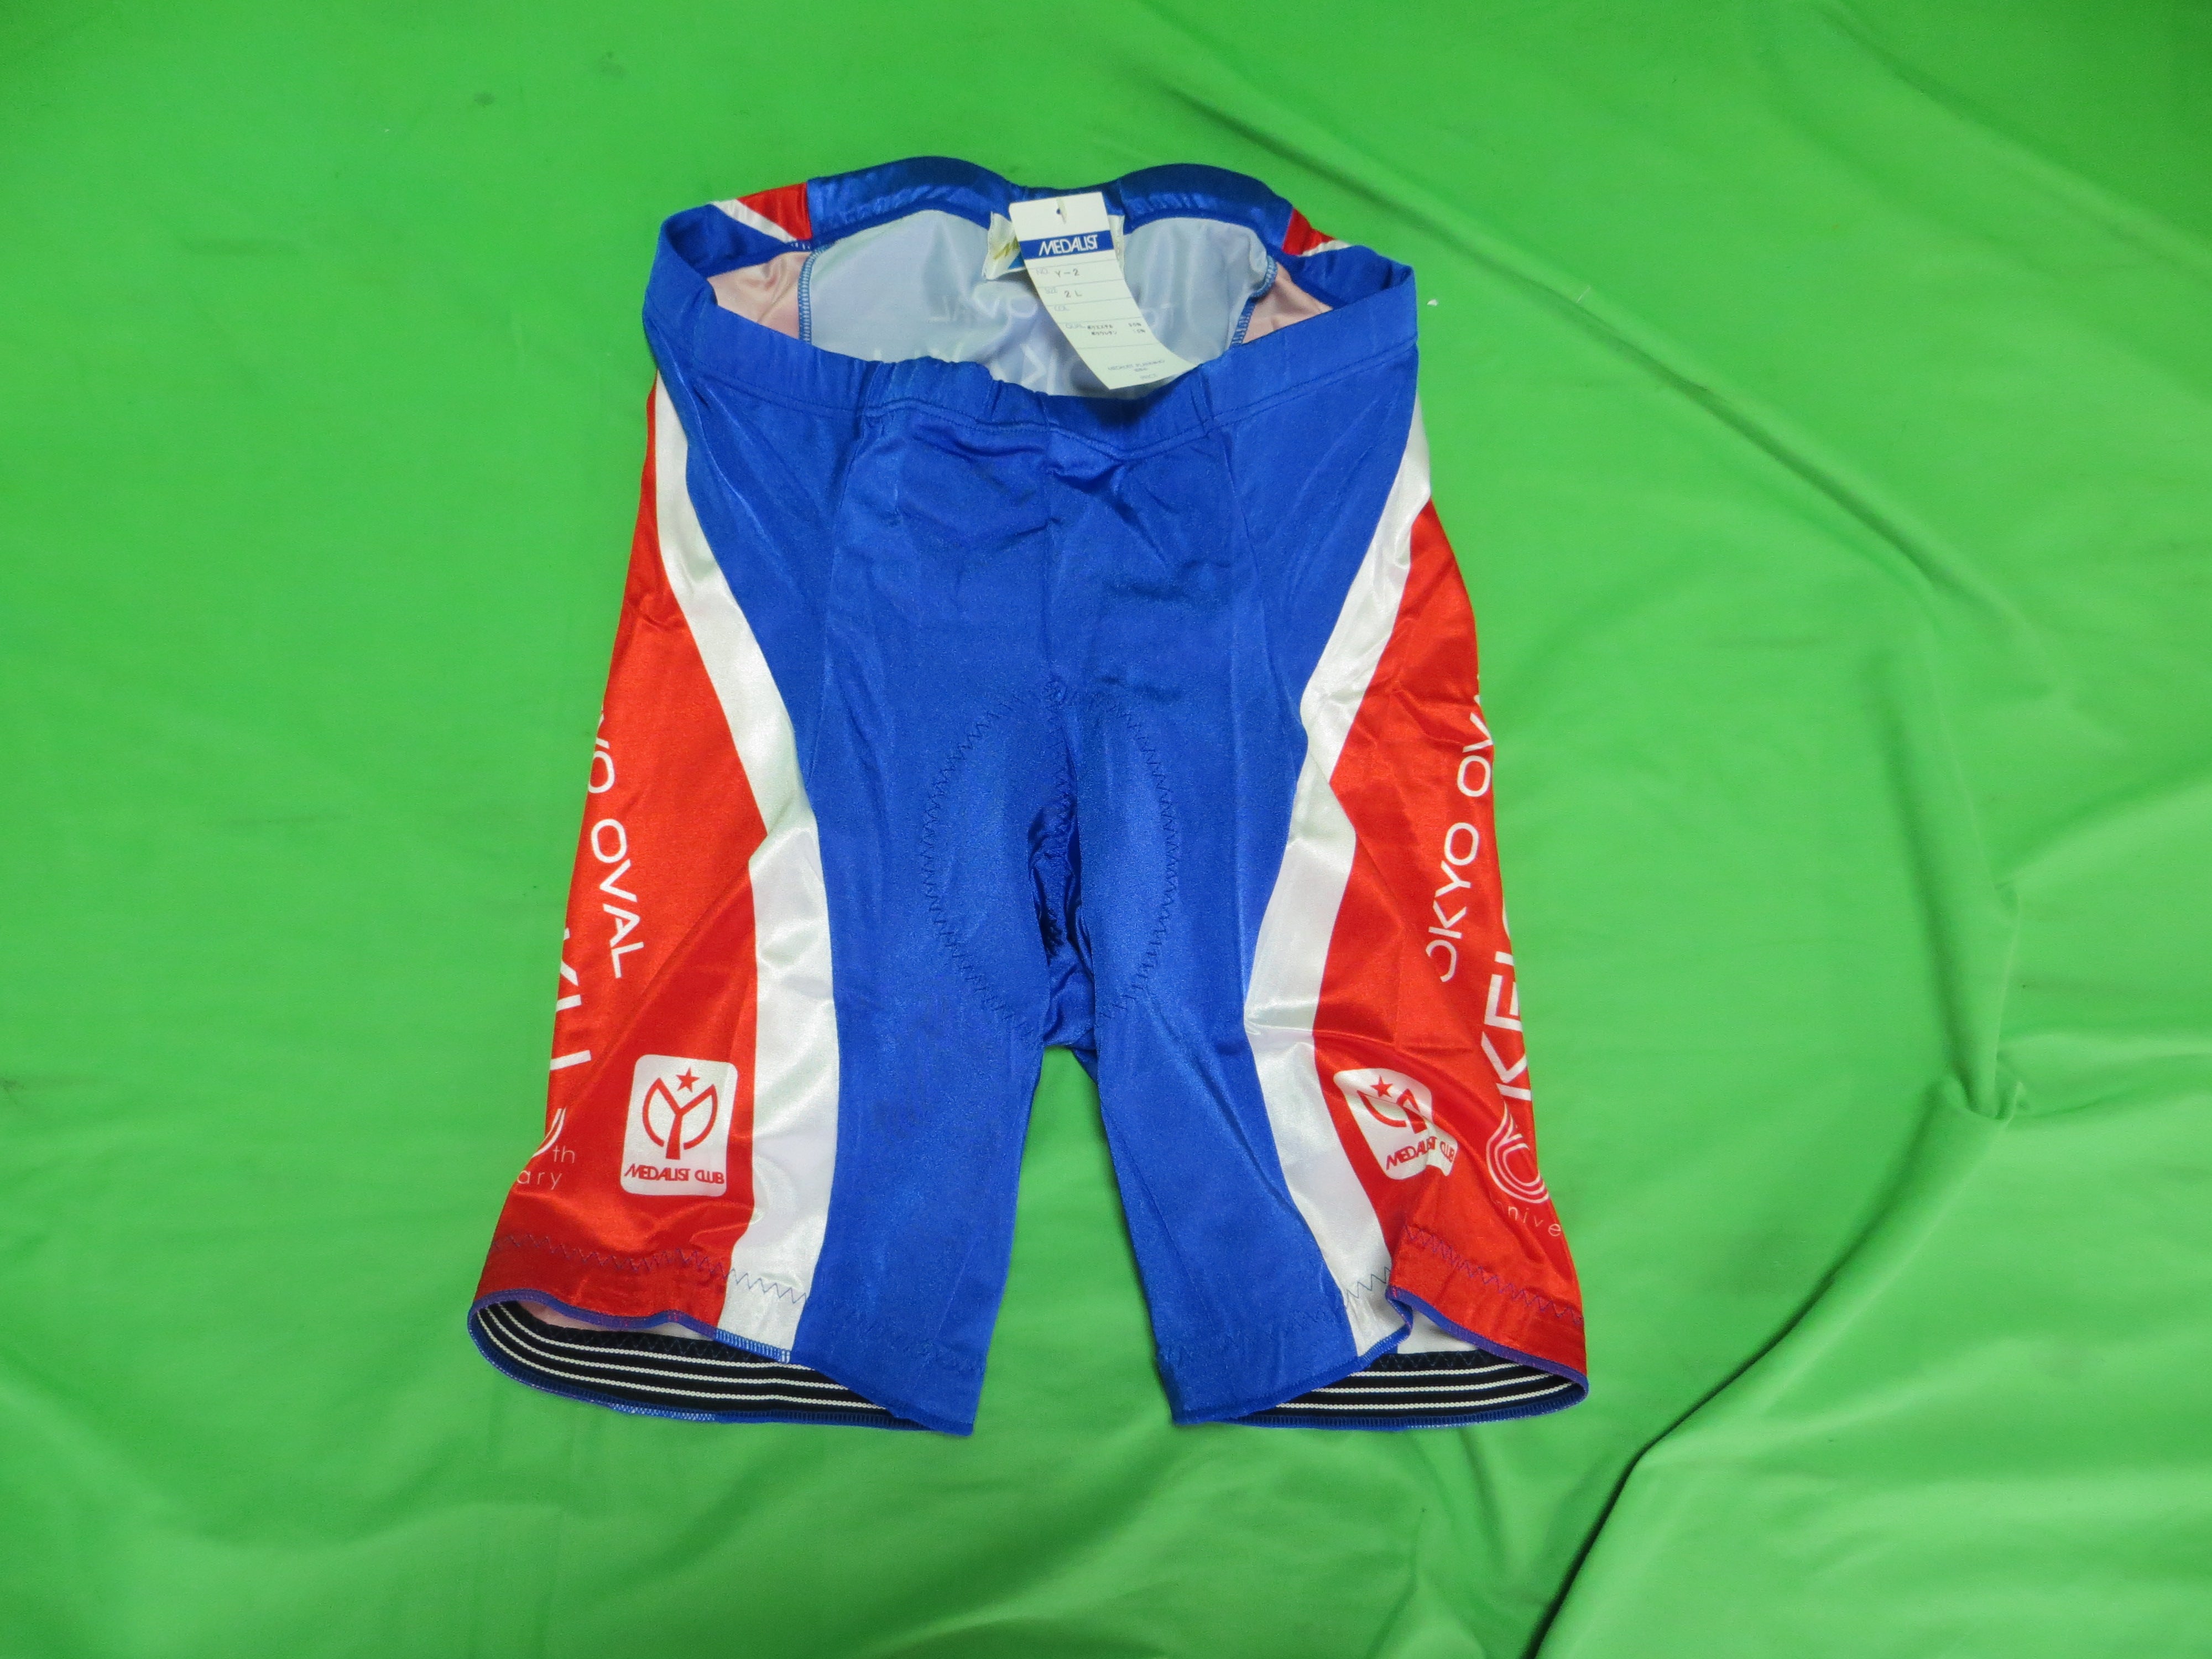 Never Used Medalist Club Keirin Shorts Japanese LL Size  (American L)